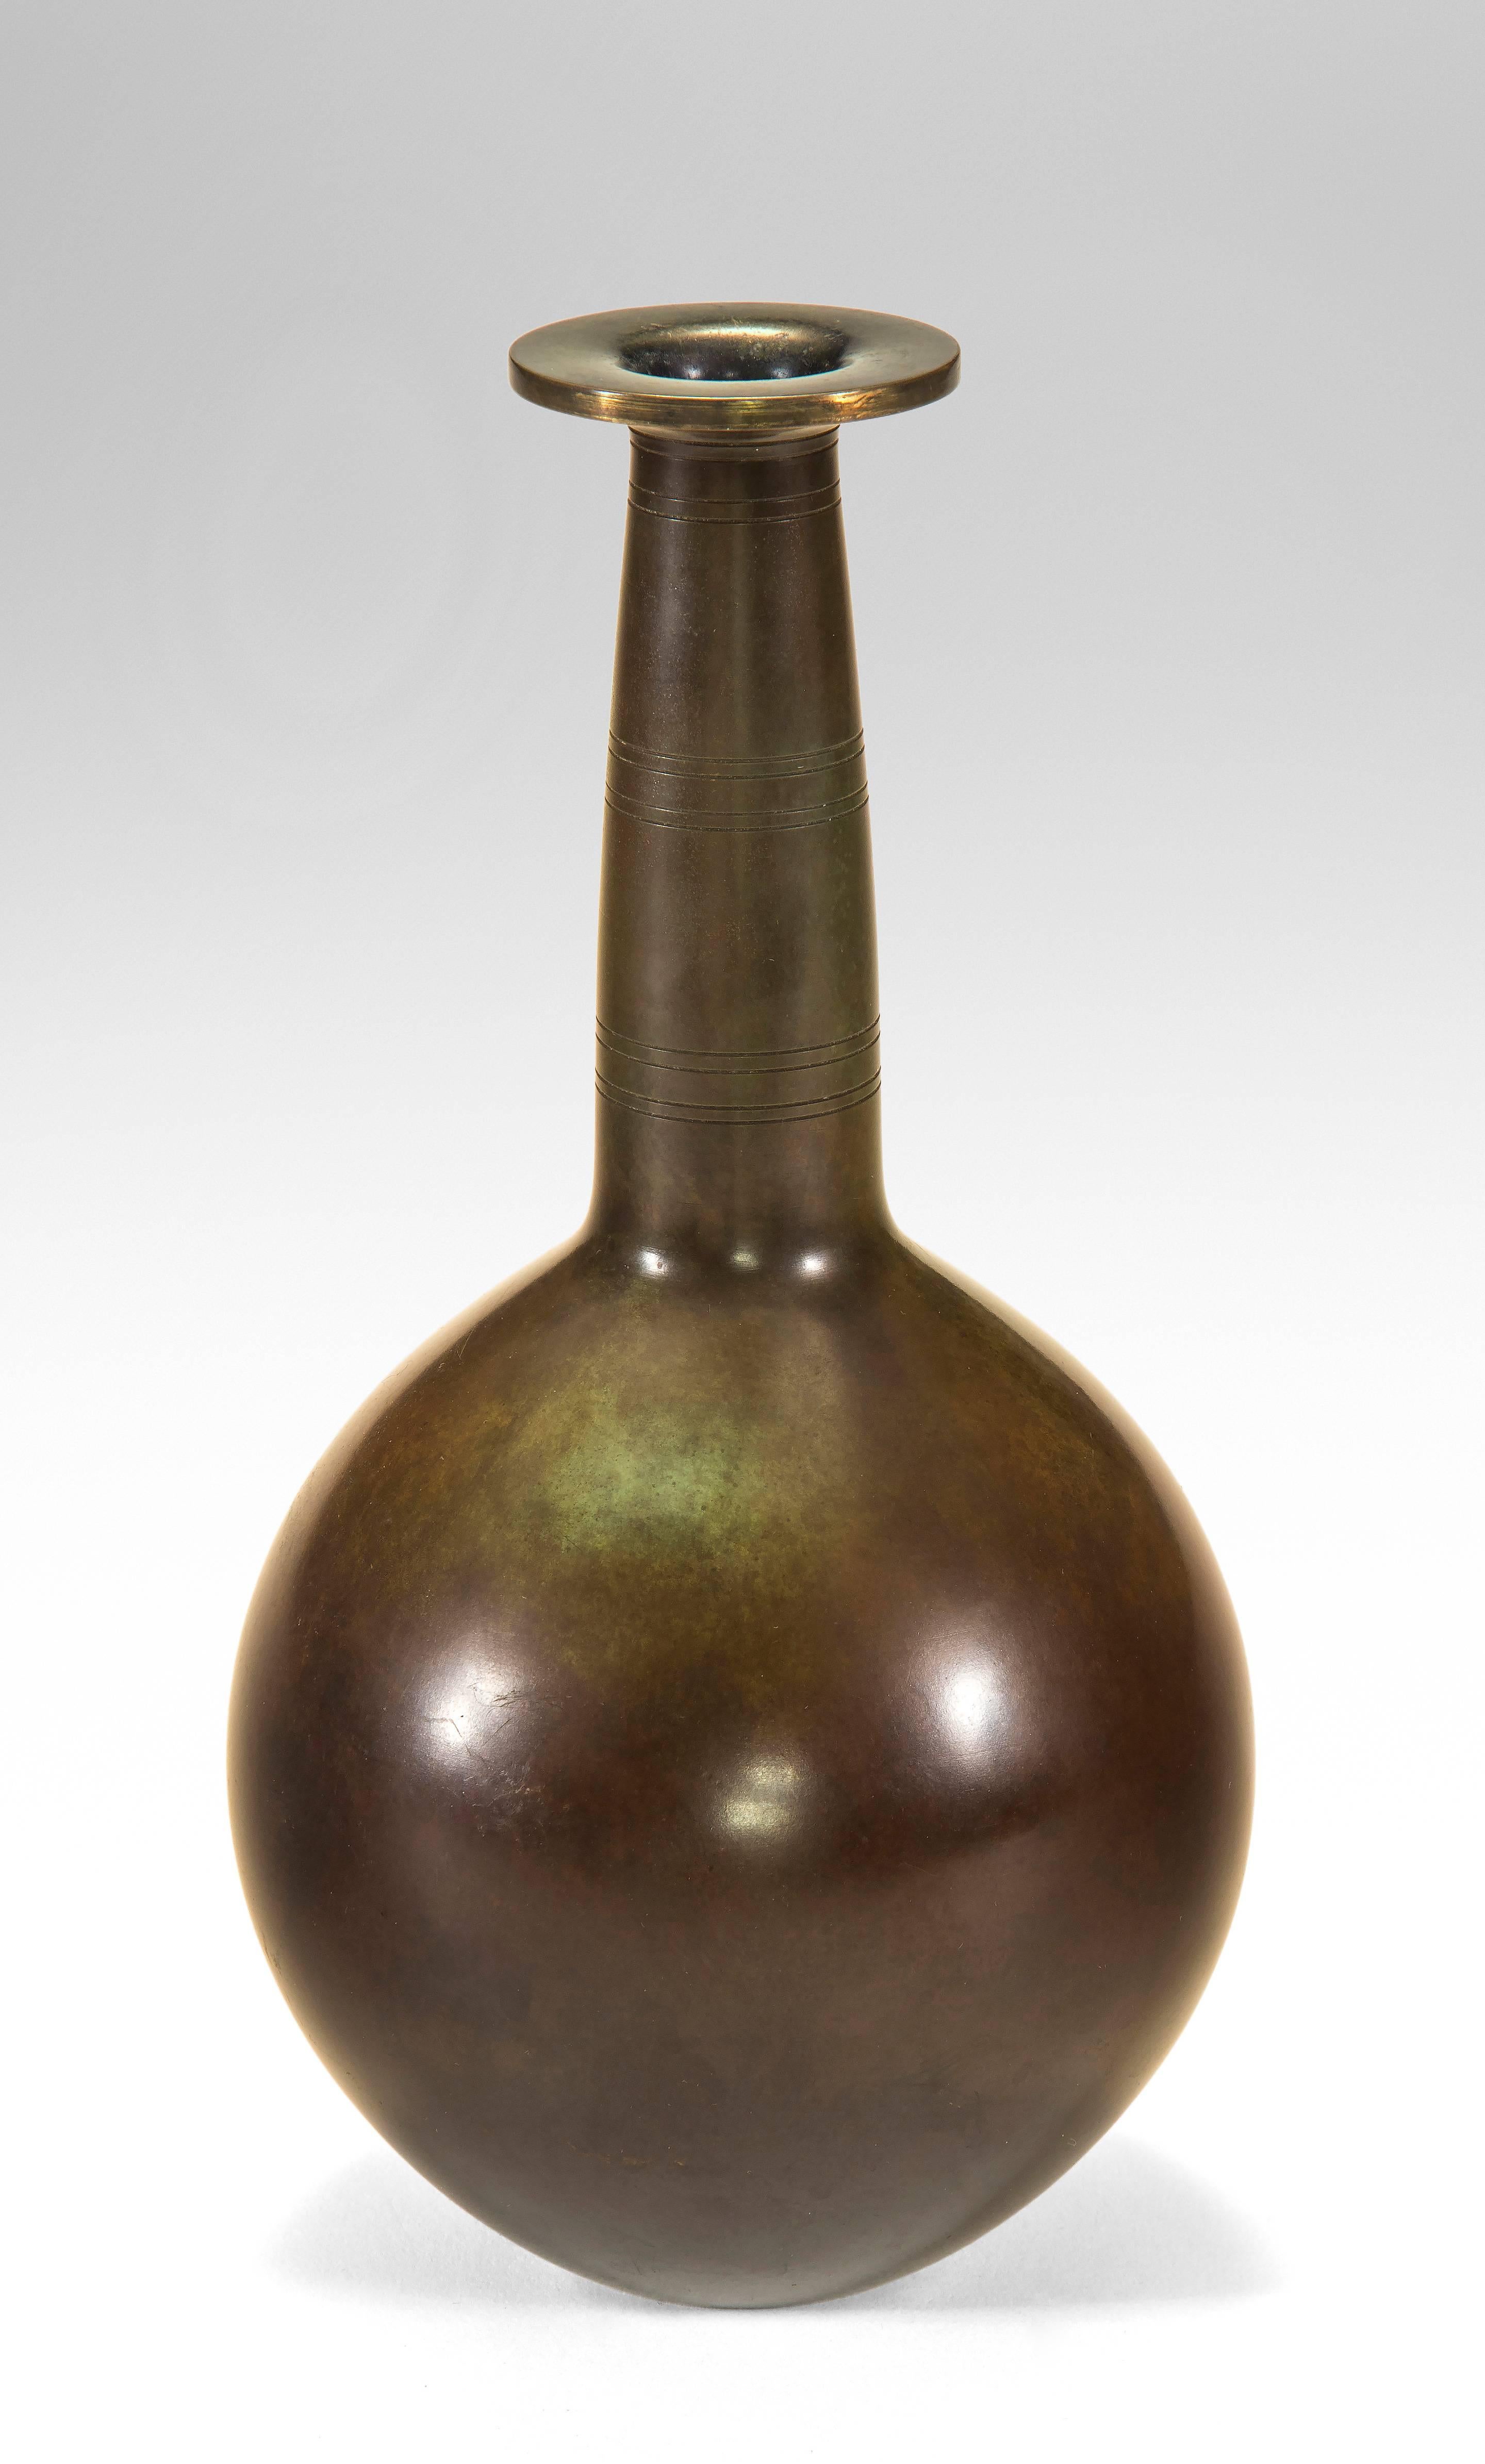 Each with a rich brown and green patination. The elongated neck, above a spherical body. Marked: Just Danmark B2367